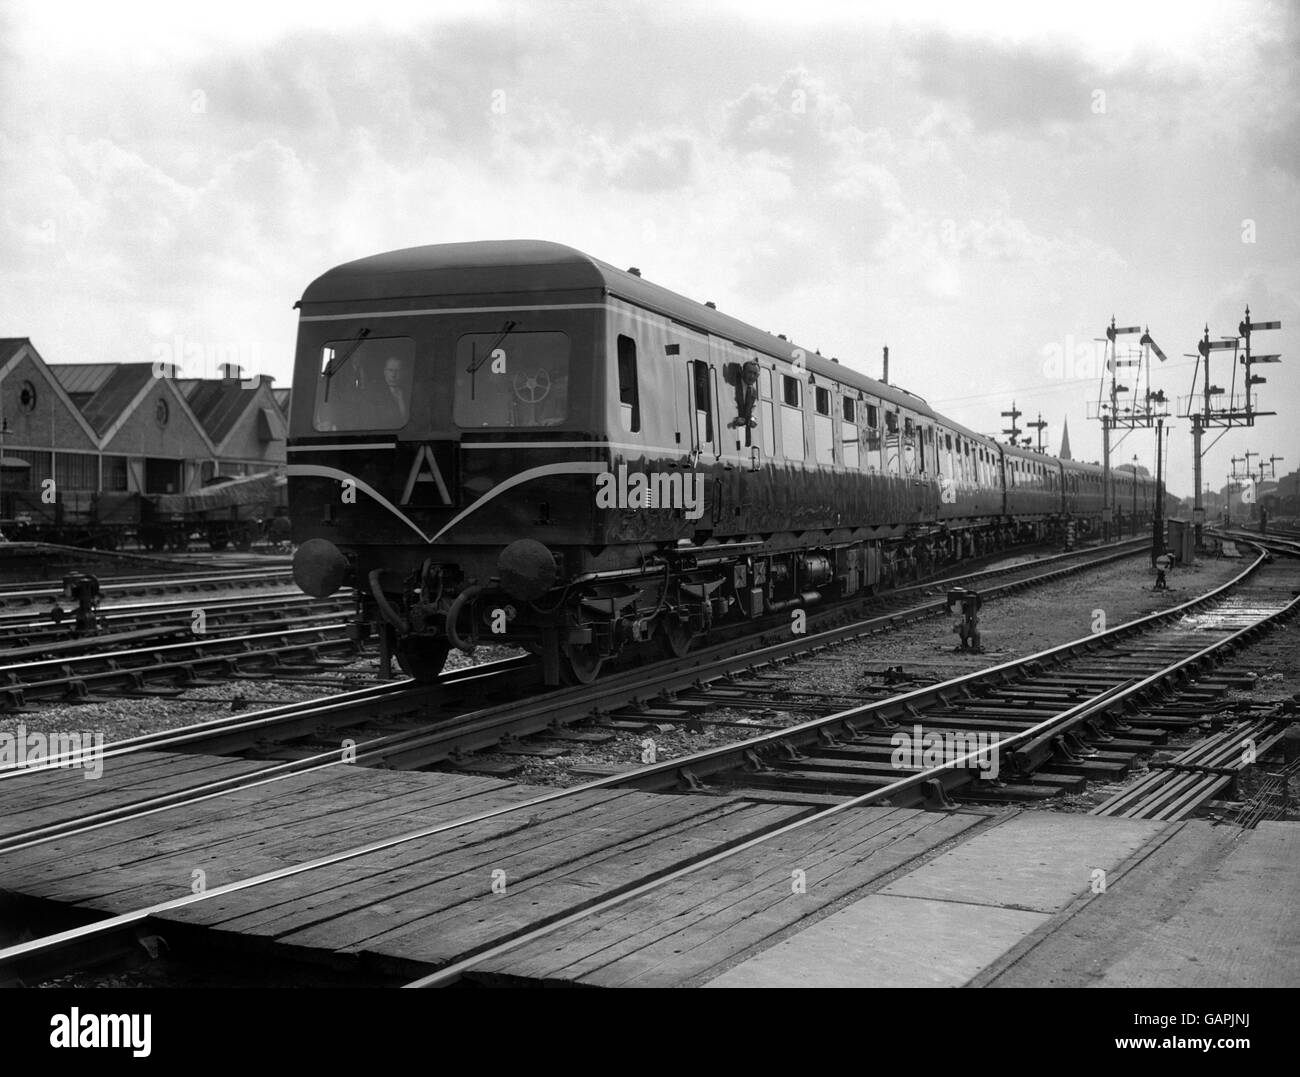 The first multiple-unit Diesel train built for main-line working on British Railways pulls into Swindon Station in Wiltshire. Stock Photo